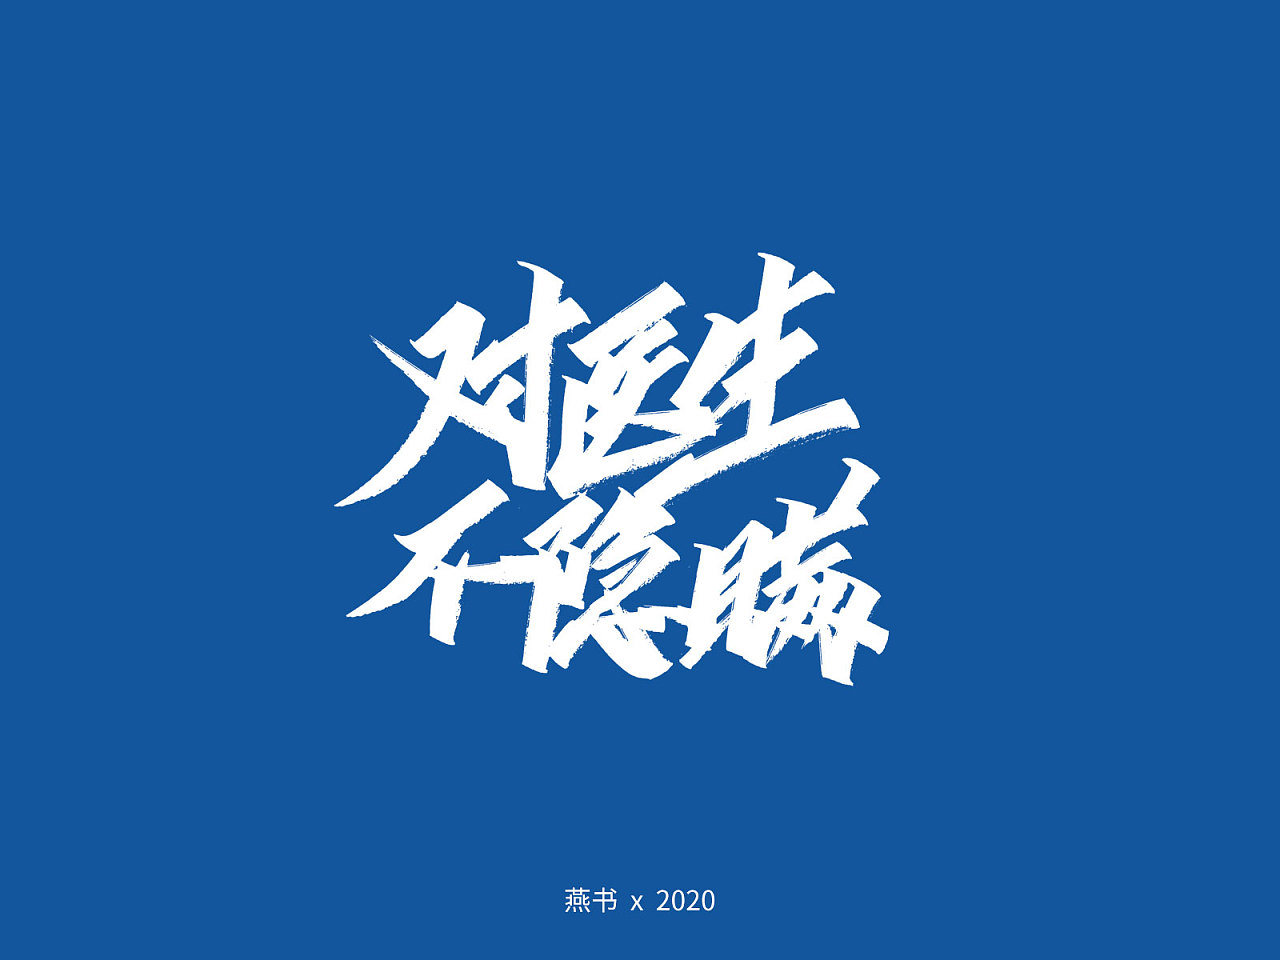 Chinese Creative Font Design-Wuhan Refueling Series 13